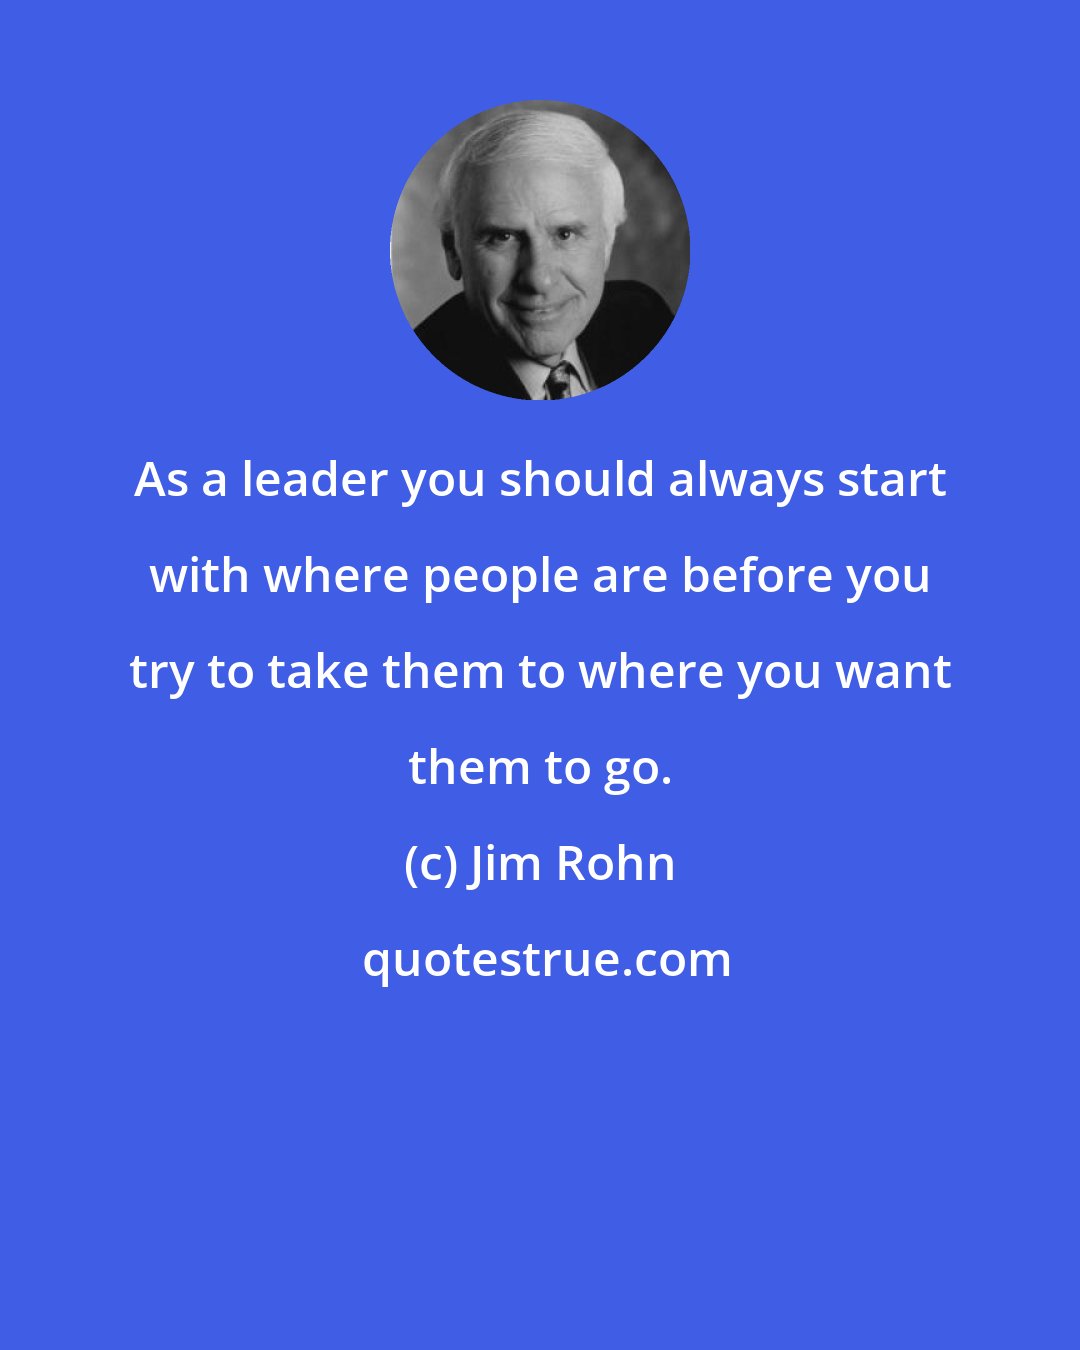 Jim Rohn: As a leader you should always start with where people are before you try to take them to where you want them to go.